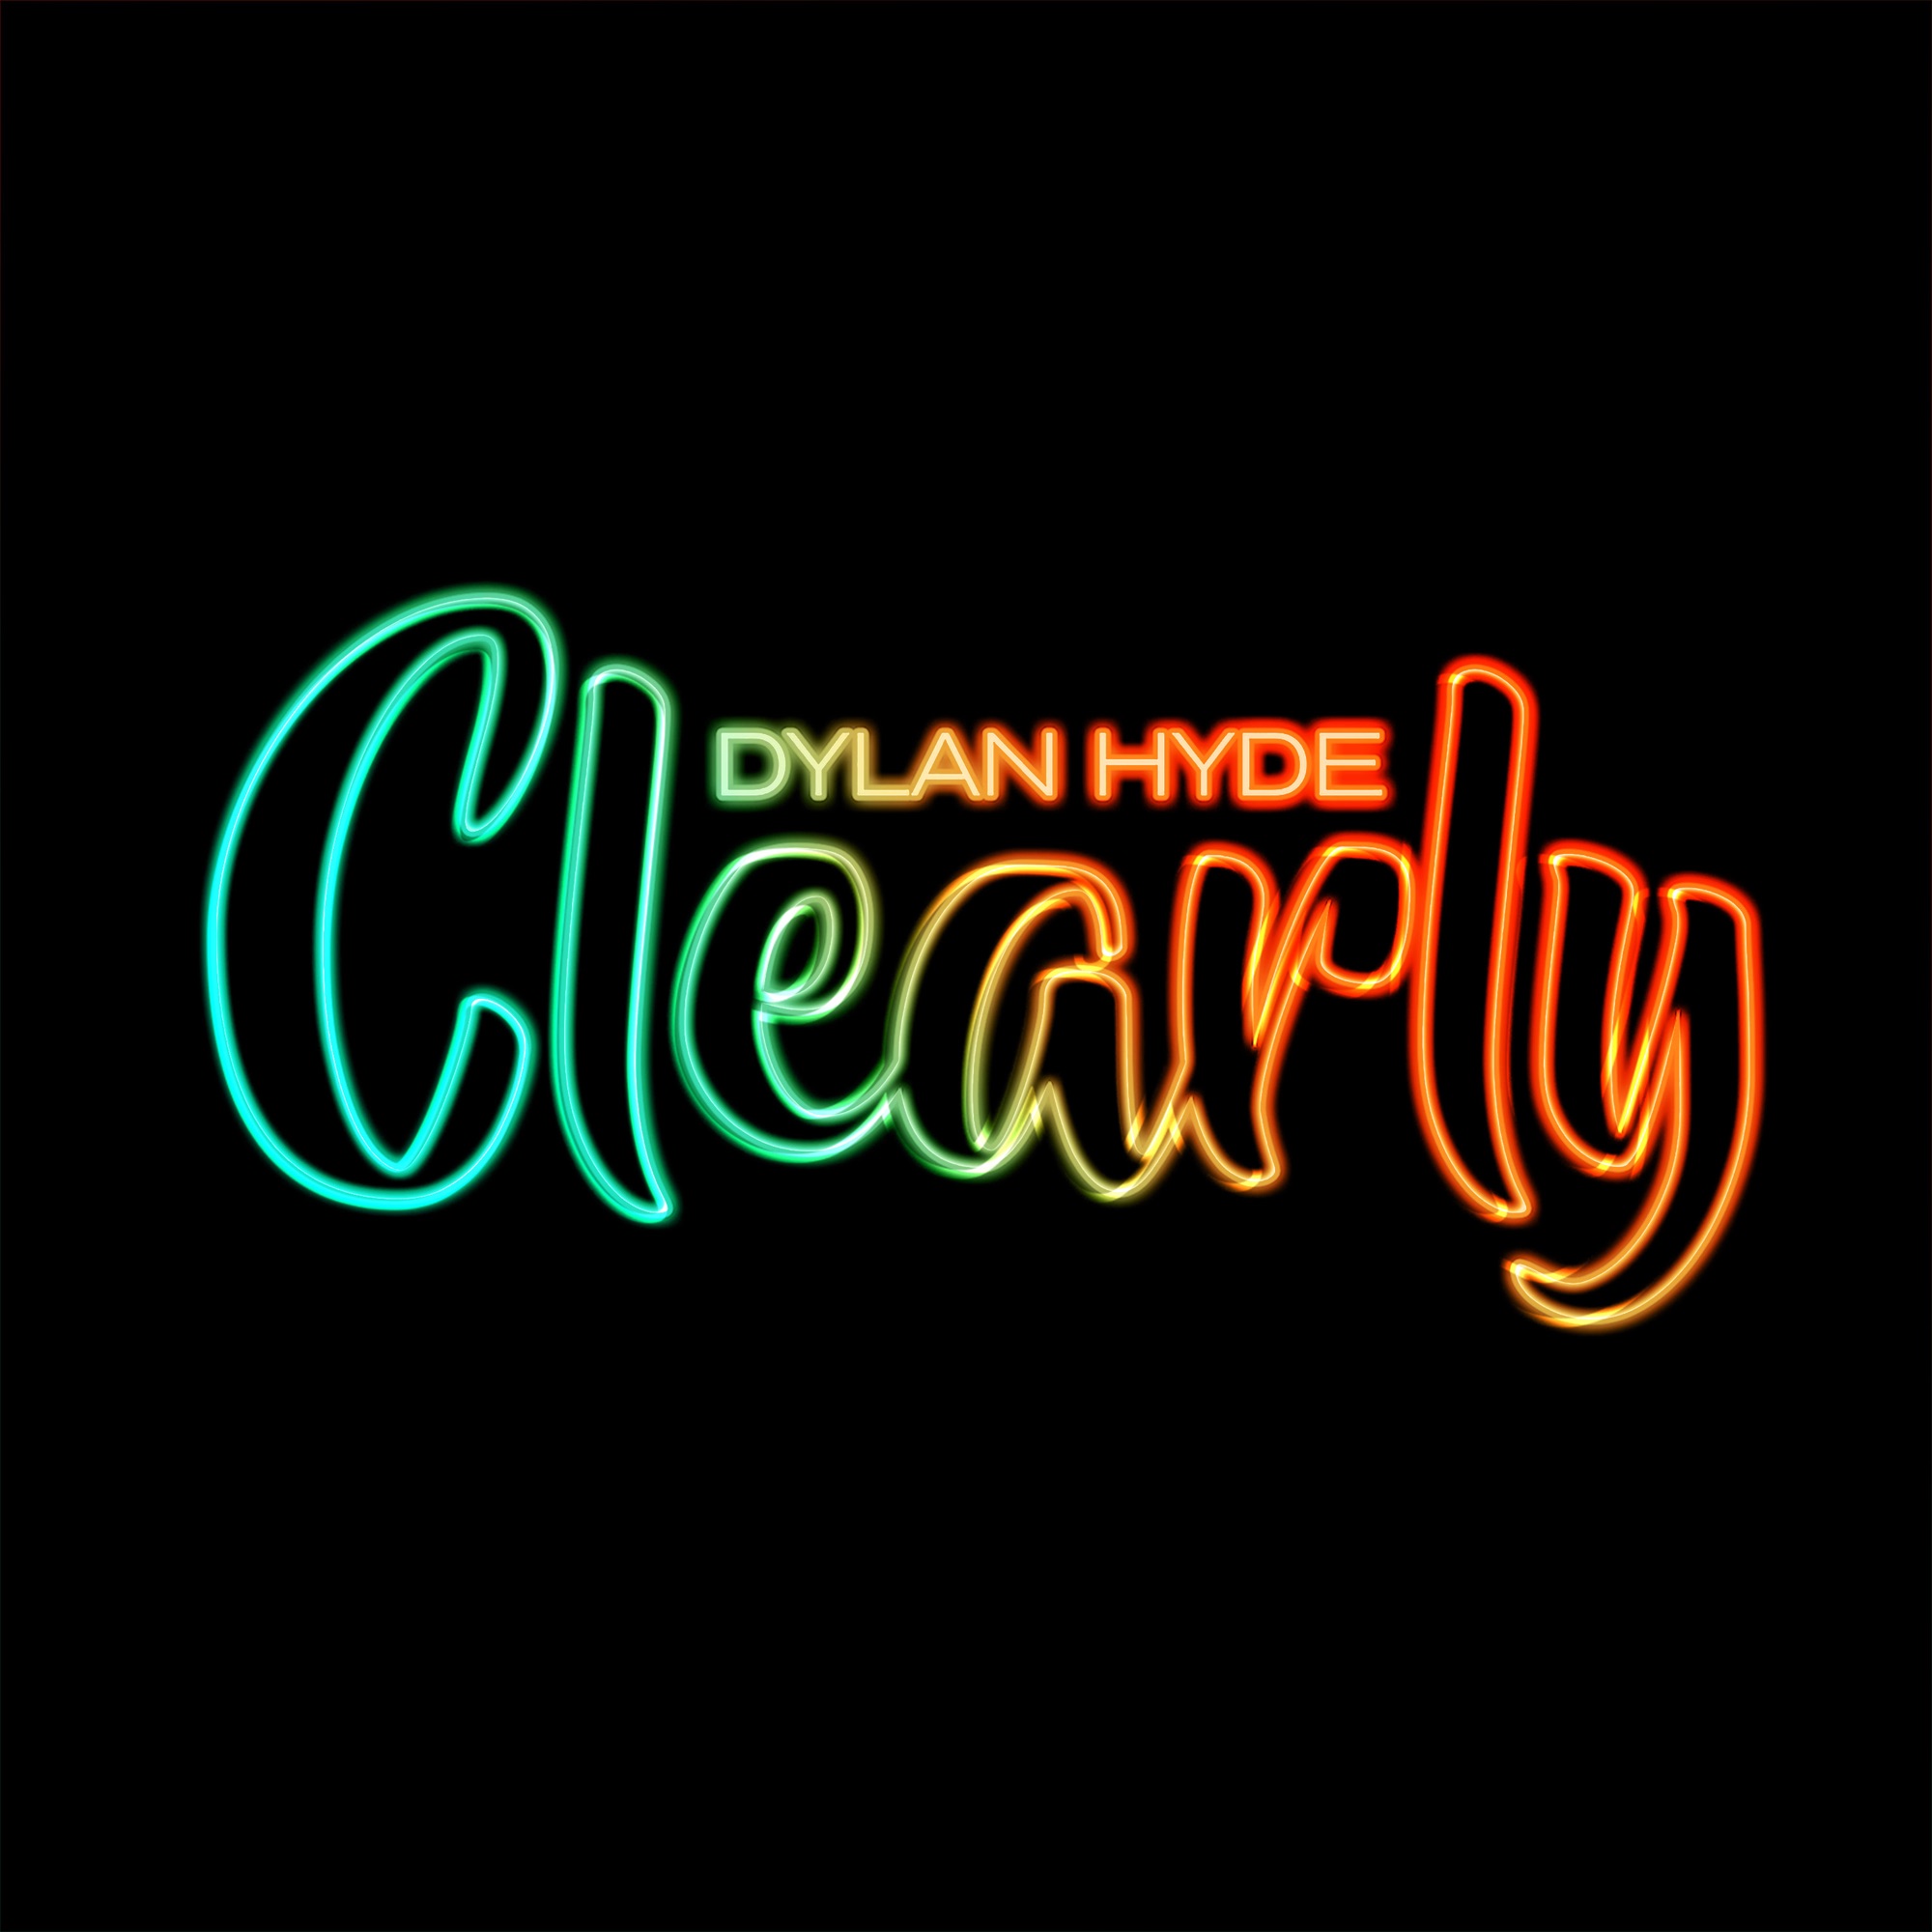 Dylan Hyde — Clearly cover artwork